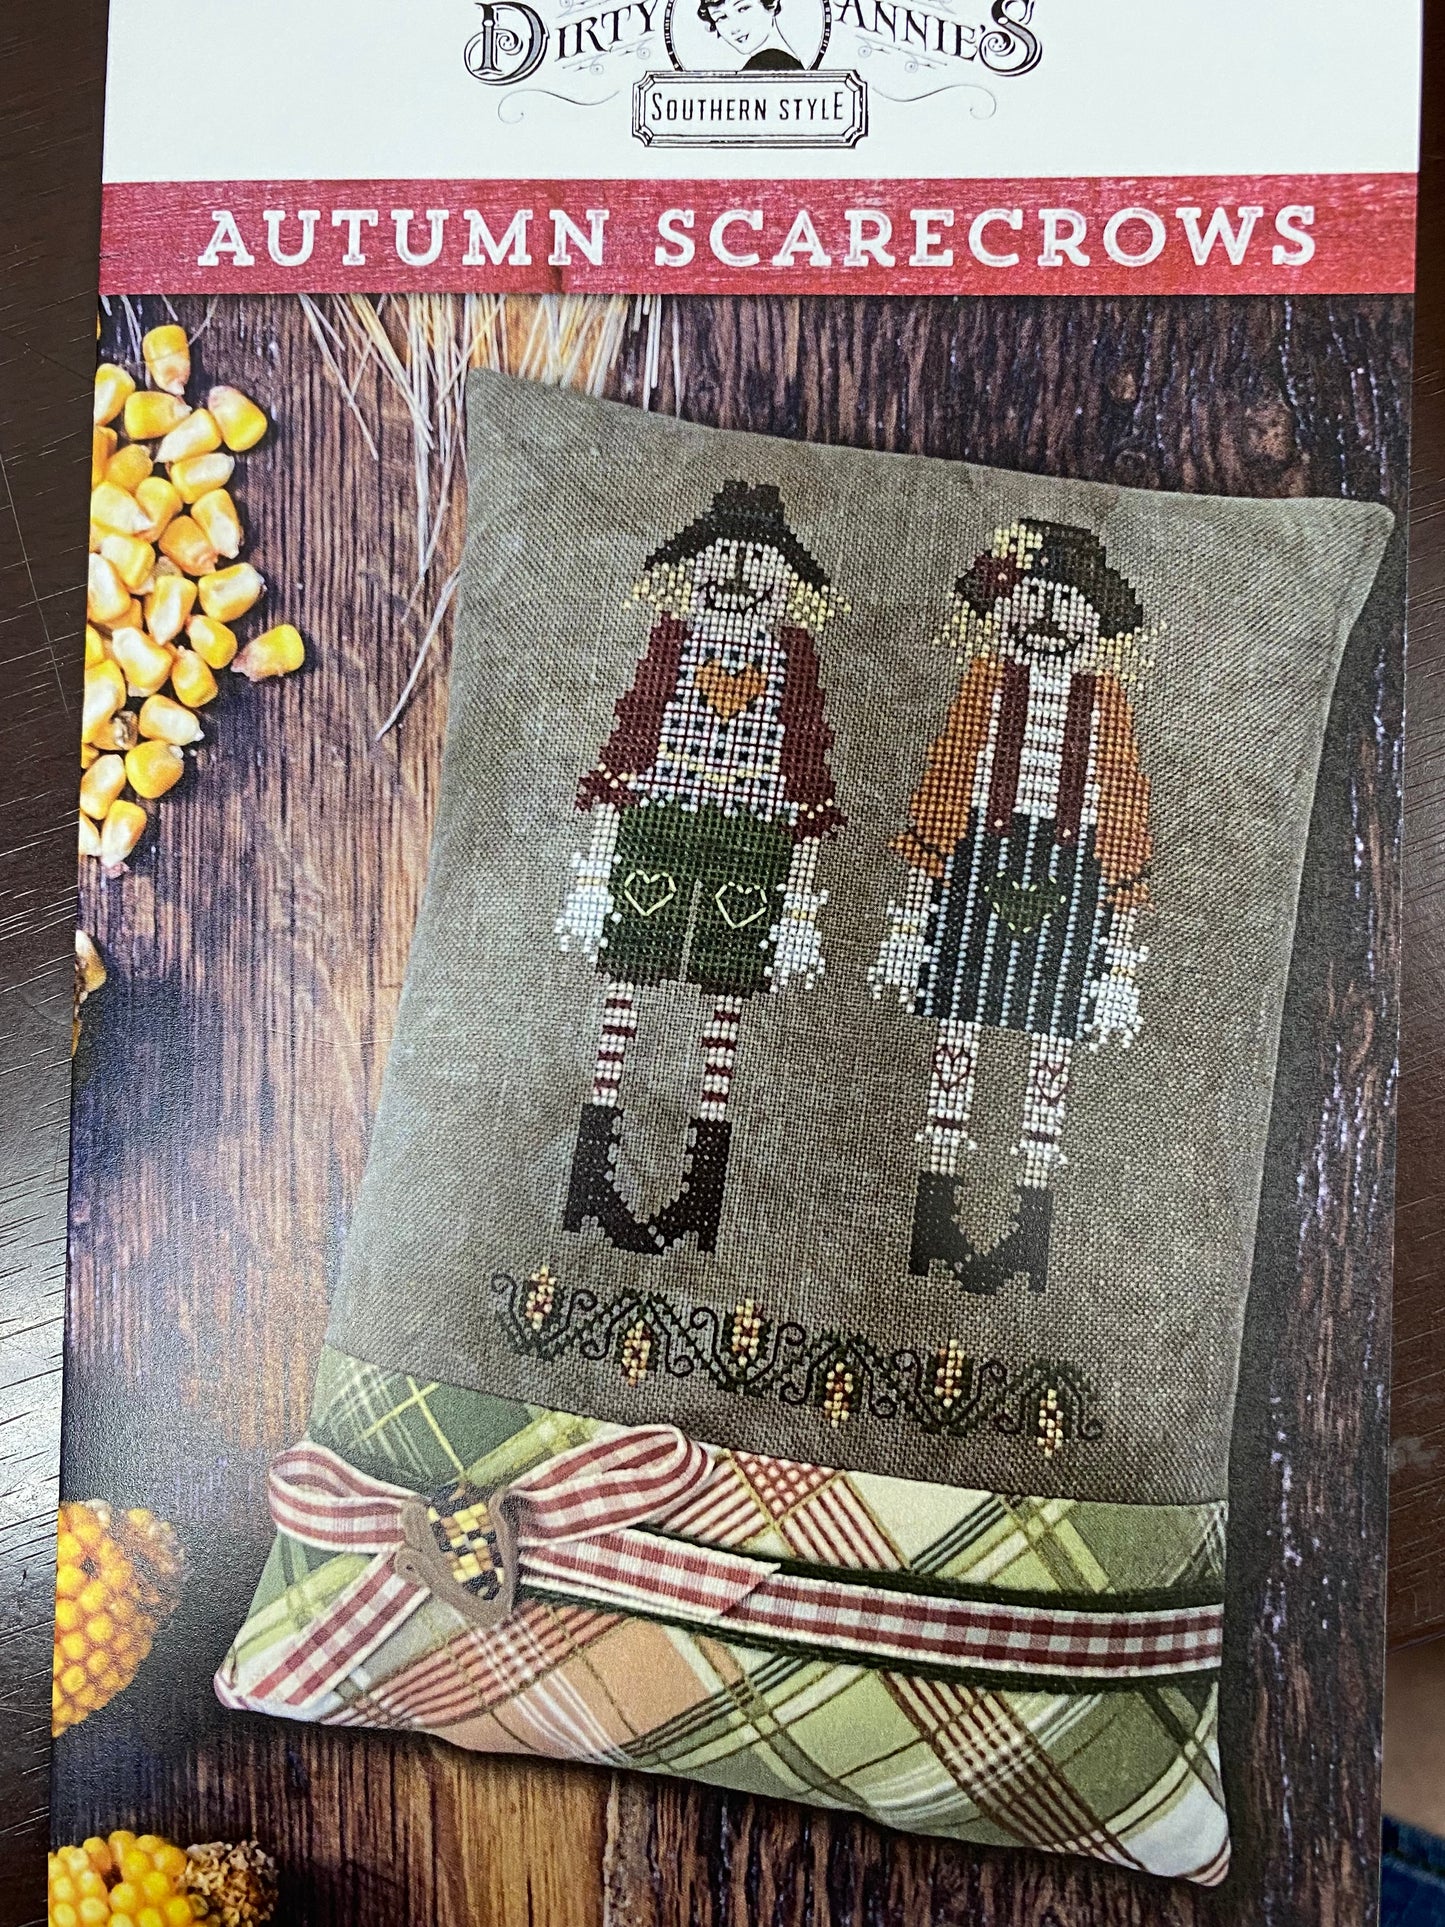 Autumn Scarecrows by Dirty Annie